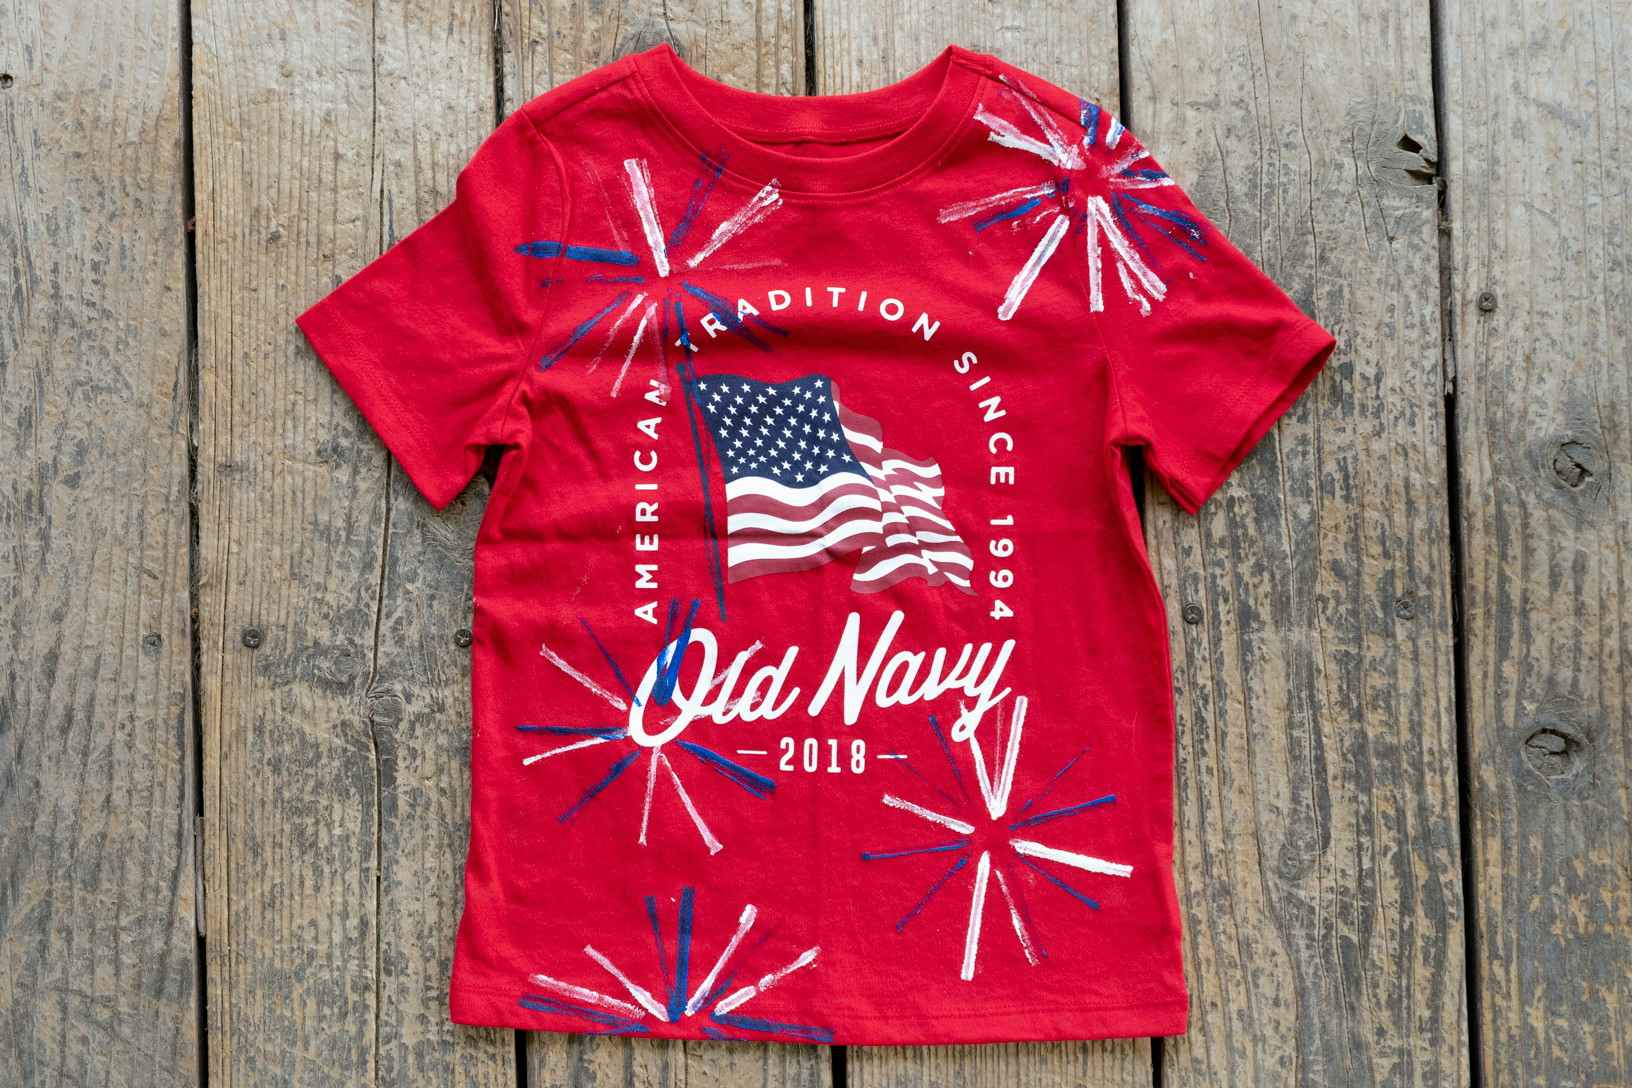 A red Old Navy Fourth of July t-shirt painted to look like it has fireworks on it, laying on a wooden floor.